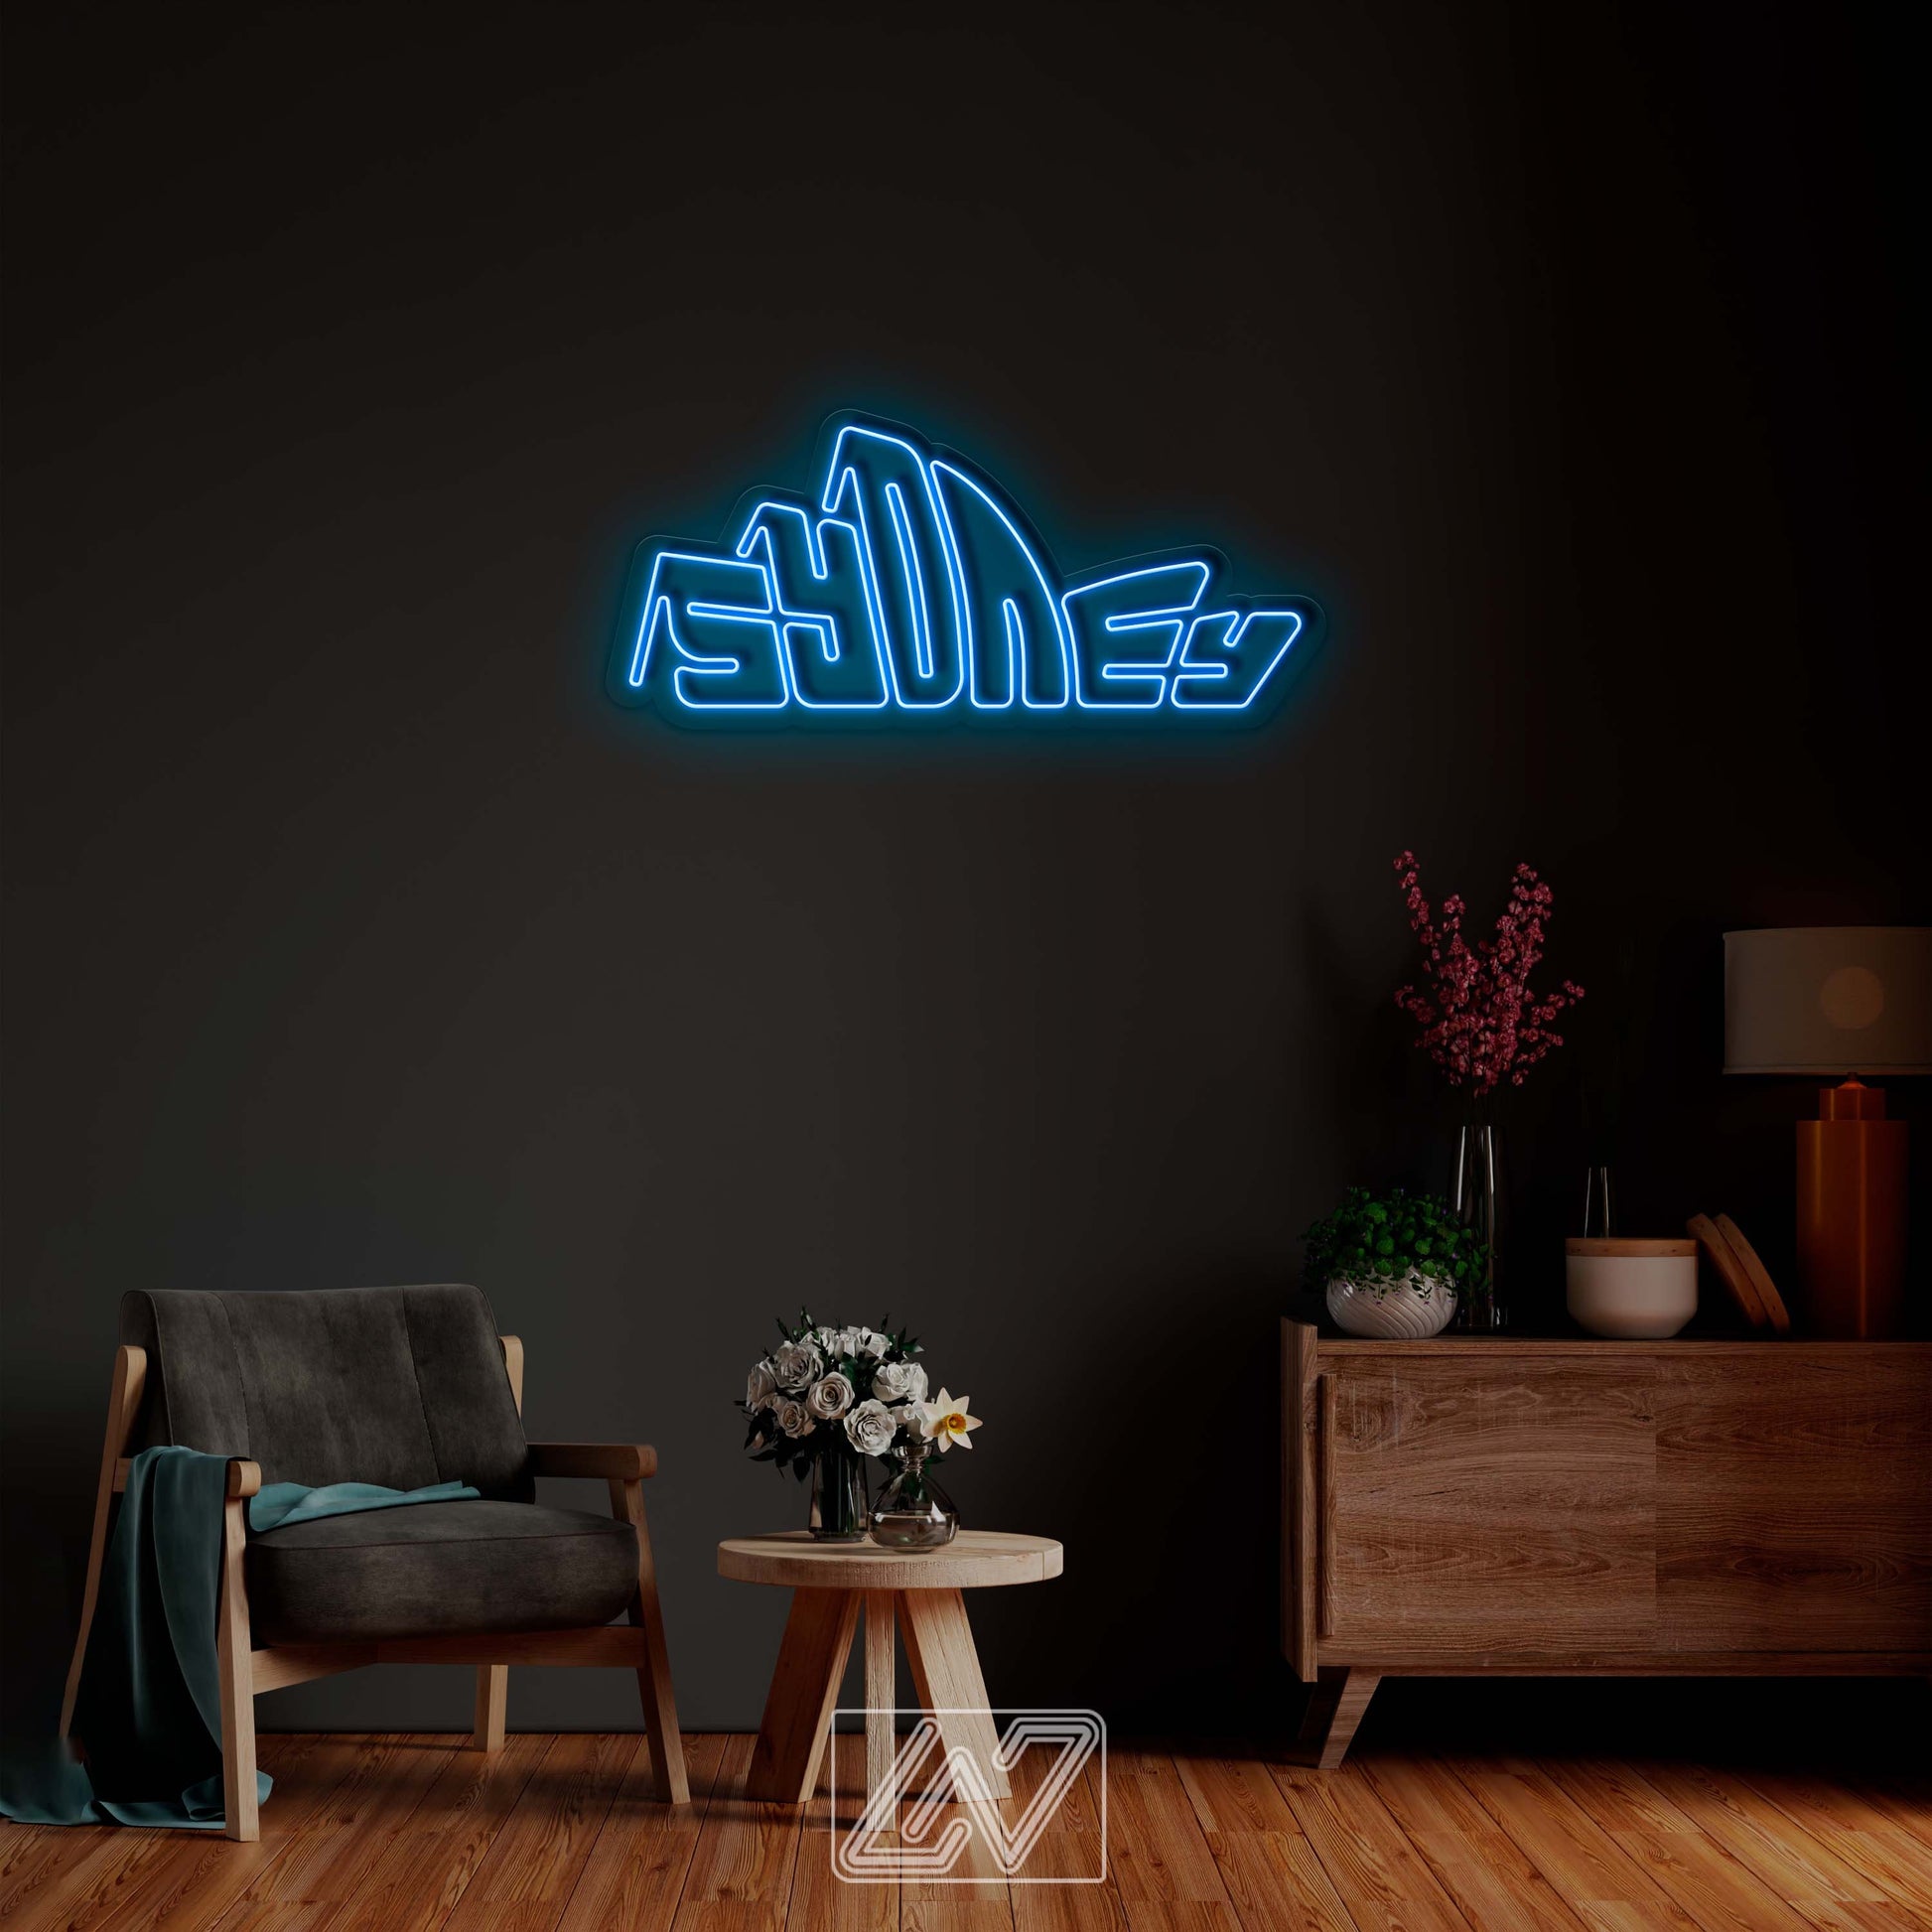 Sydney - LED Neon Sign, City Neon Sign, Neon Sign Bedroom, Neon Sign Art, Neon Sign Bar, Neon Light, Led Neon Sign